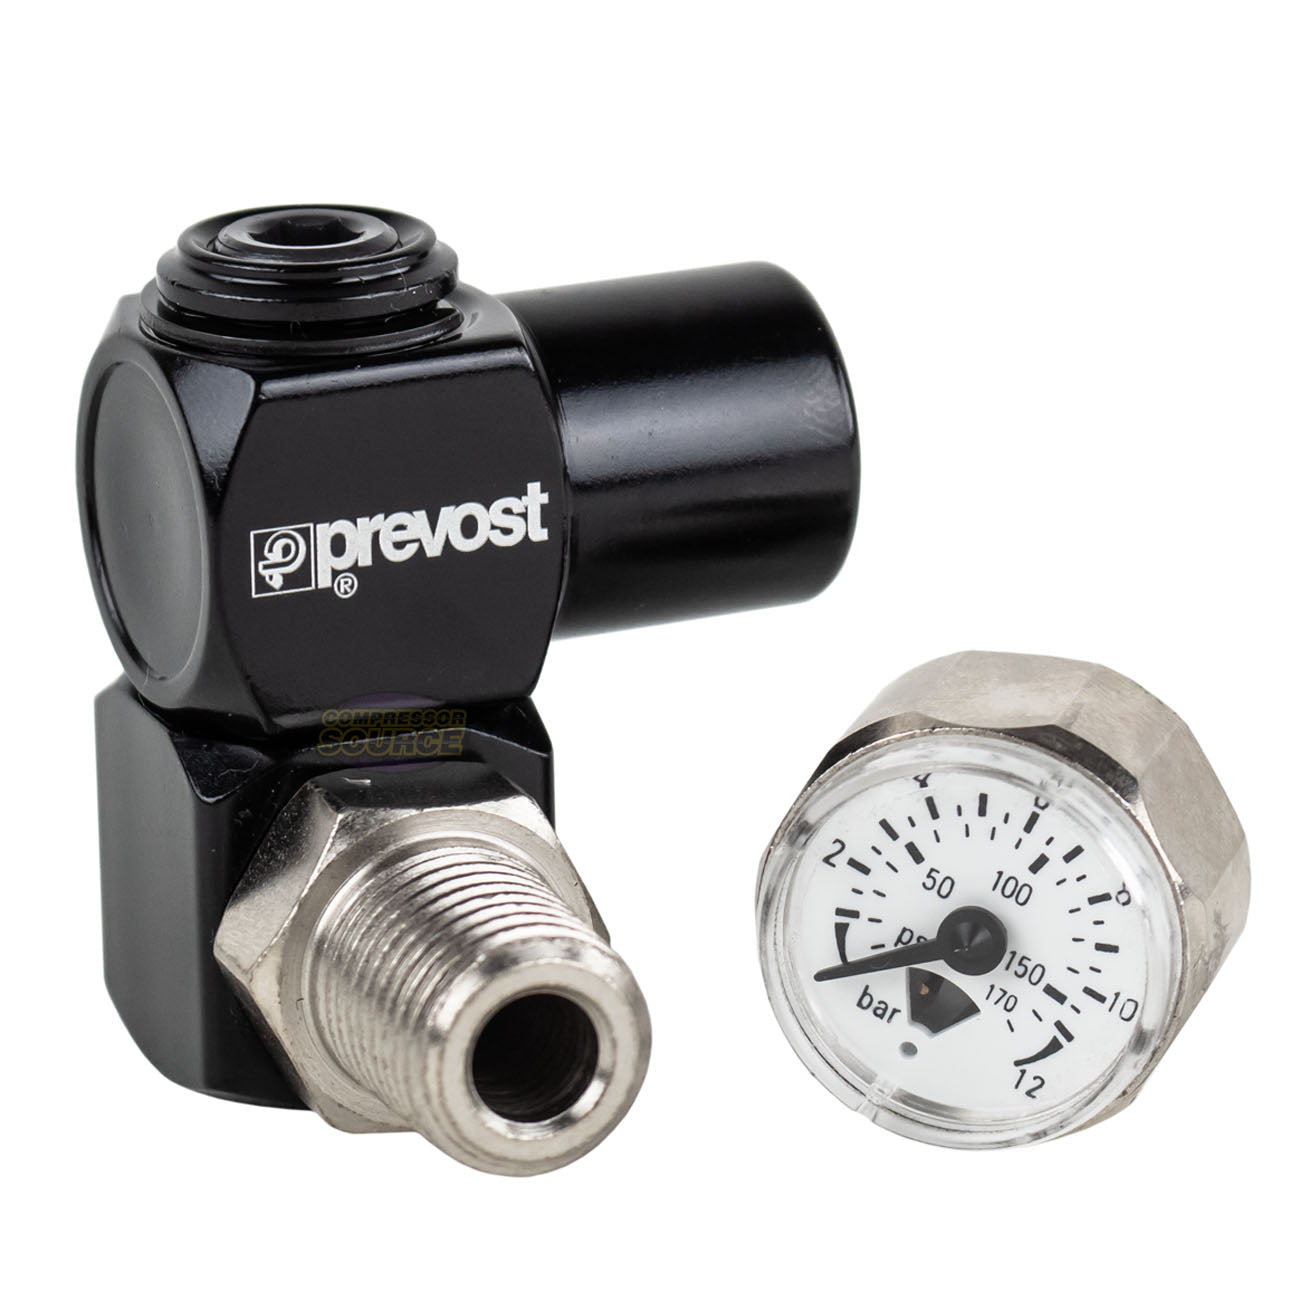 New Prevost Universal 360 Air Hose Swivel Connector With Pressure Gauge 1/4" NPT